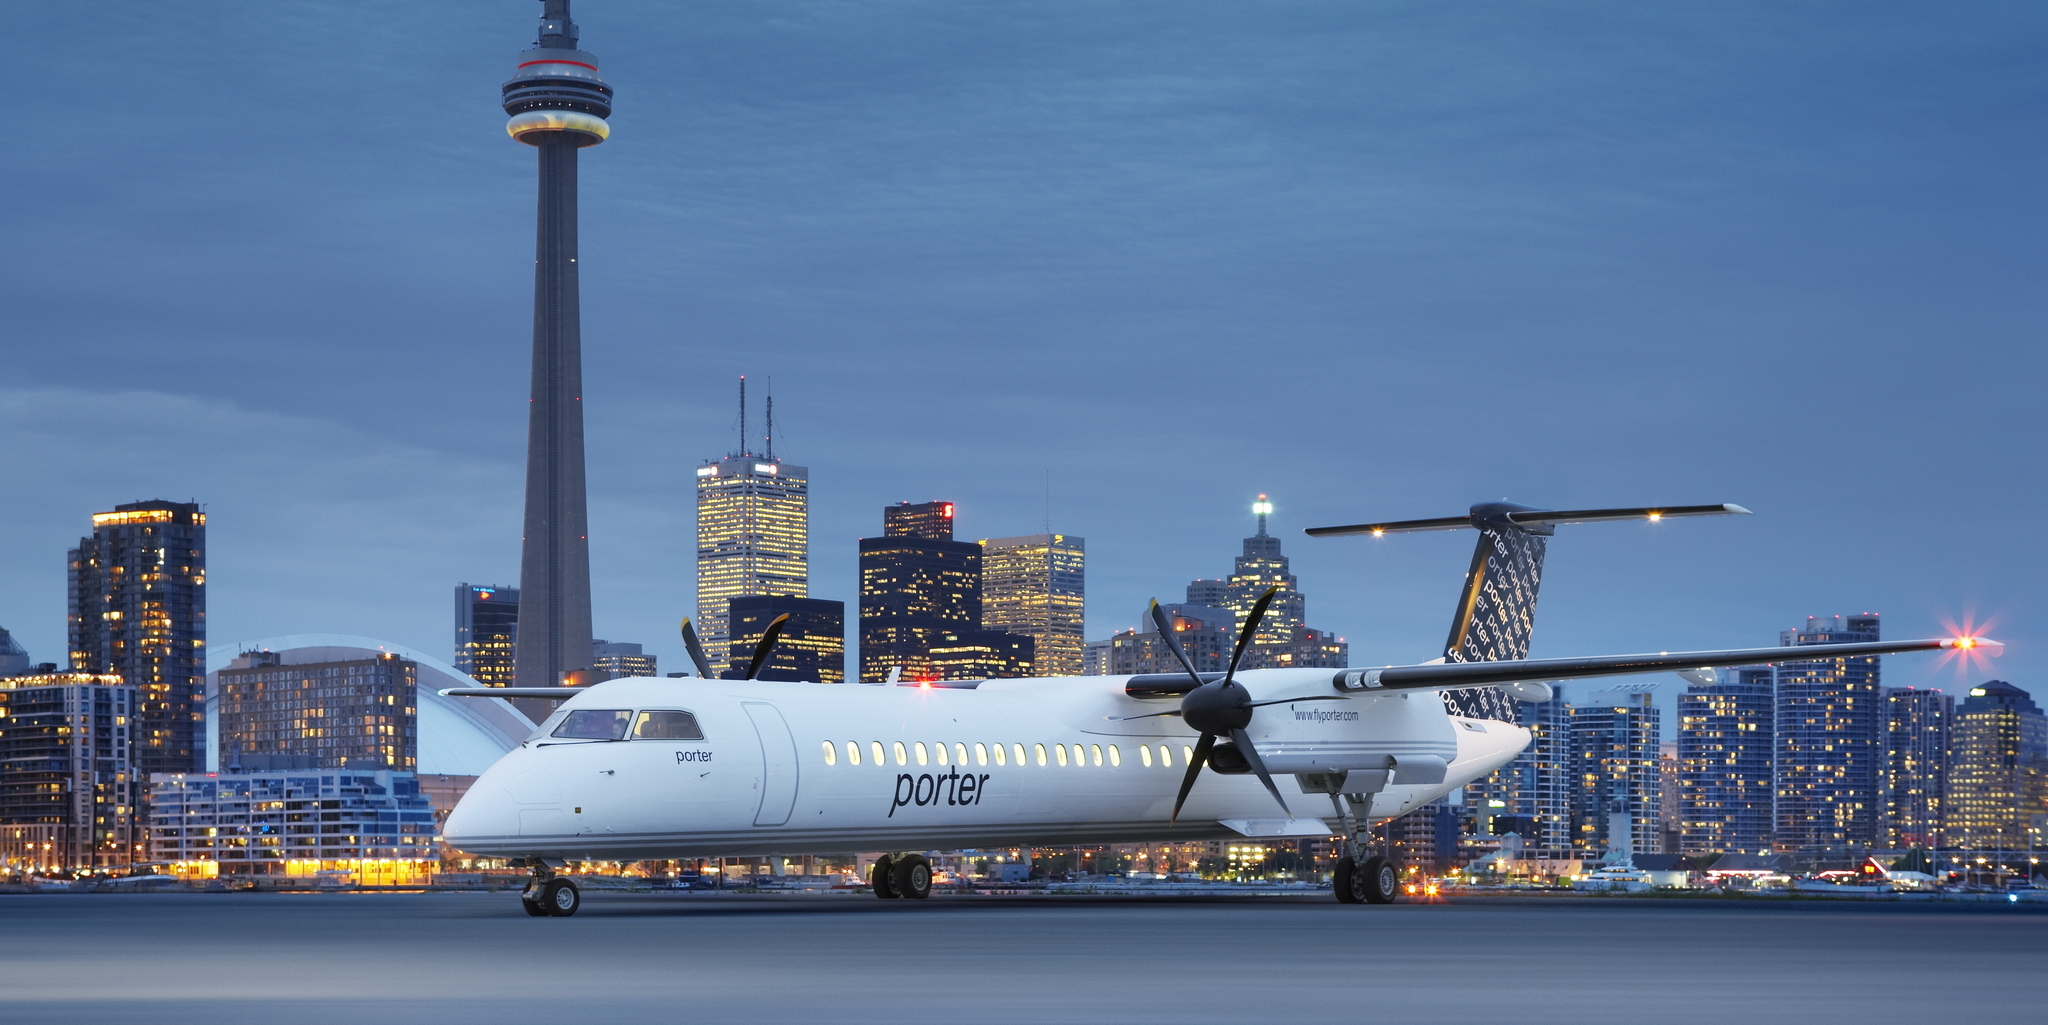 Porter Airlines at Toronto City Airport